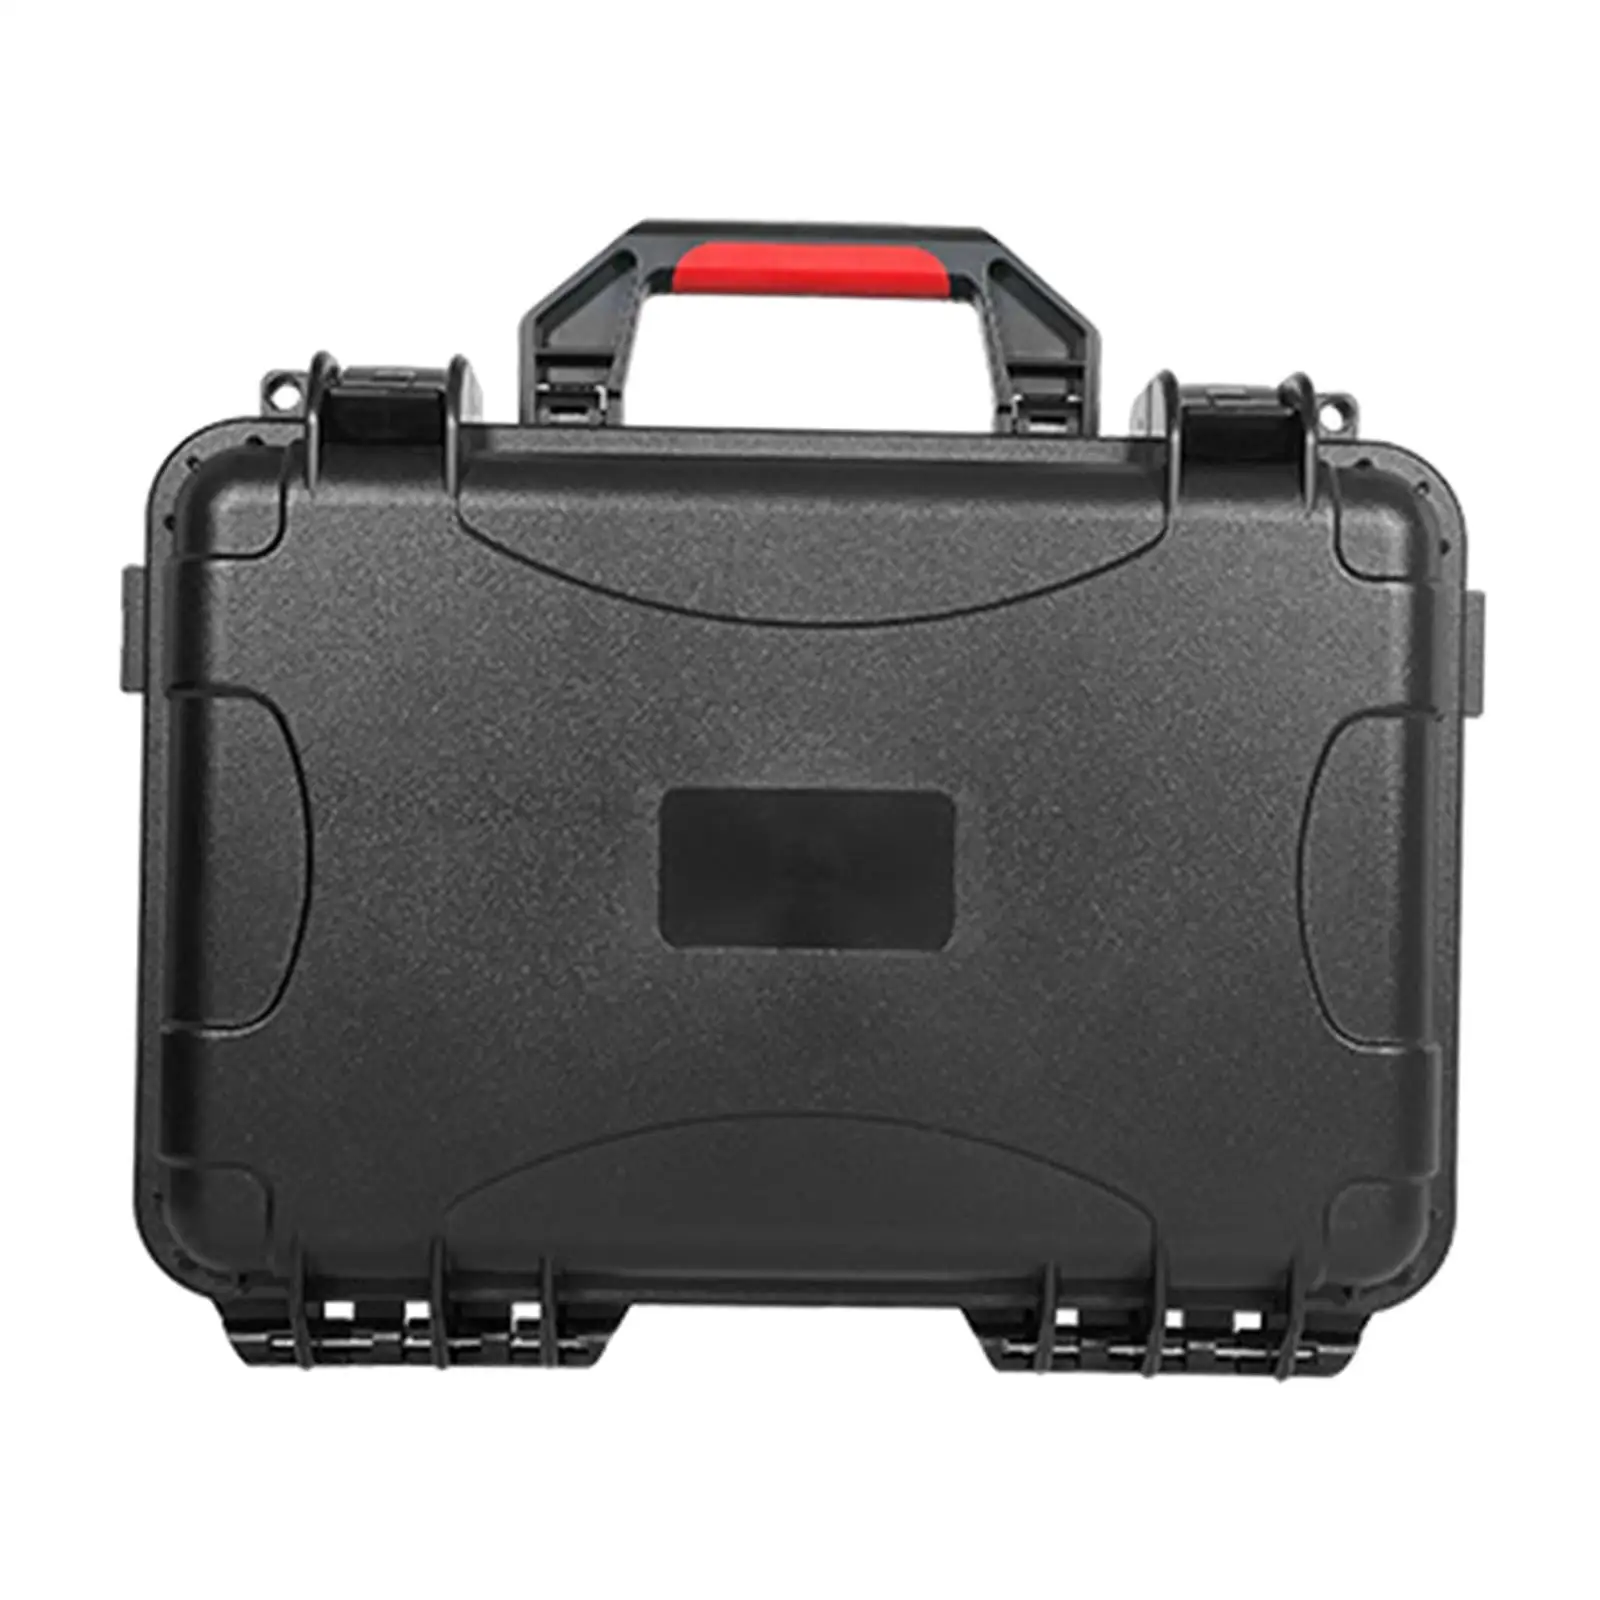 Travel Hard Shell Case Protective Waterproof Hard Case Drone Body Carrying Case for Scientific Exploration Accessories